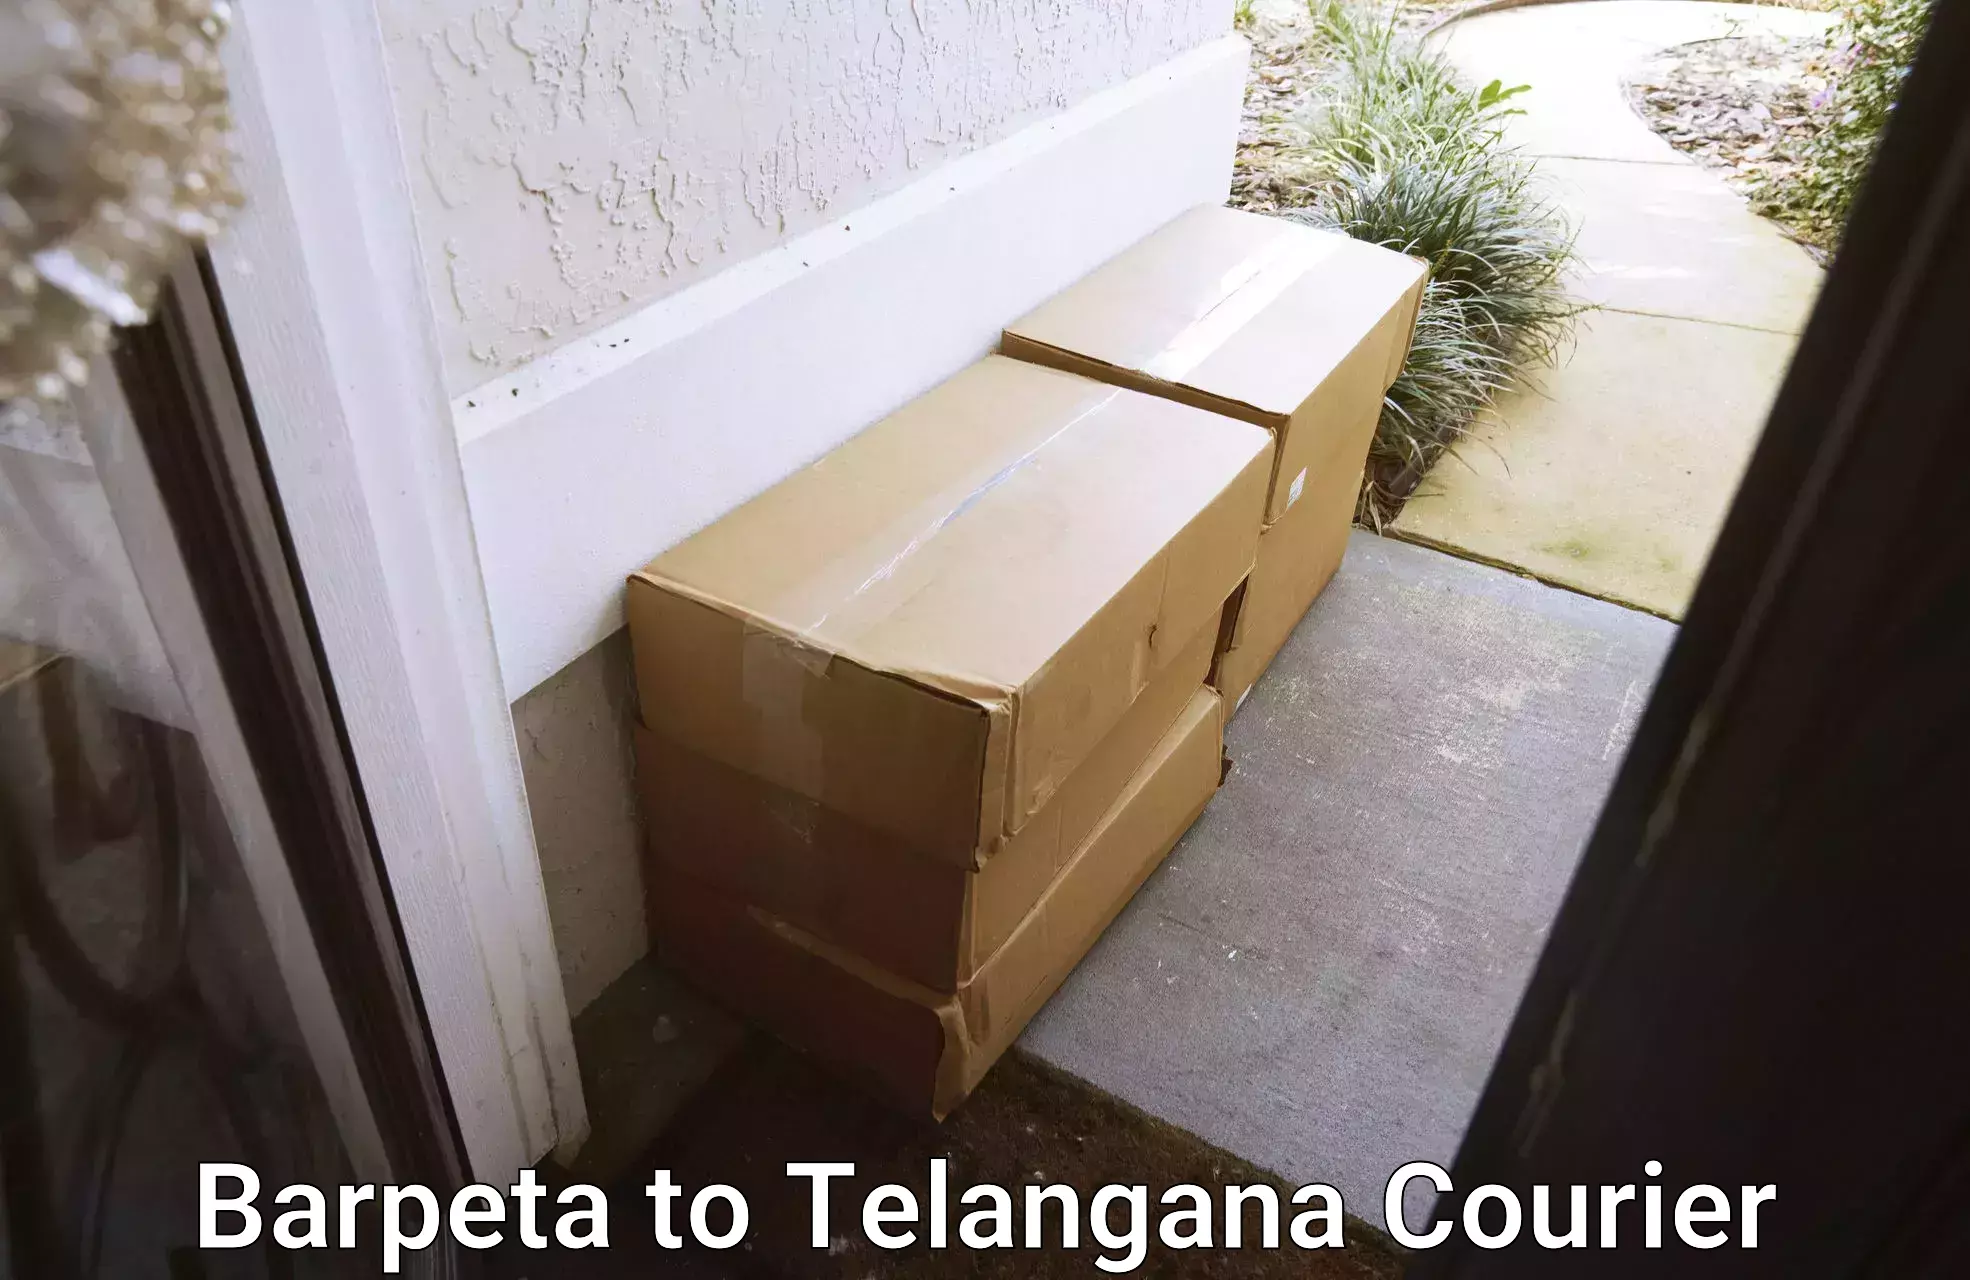 Subscription-based courier Barpeta to Hajipur Mancherial